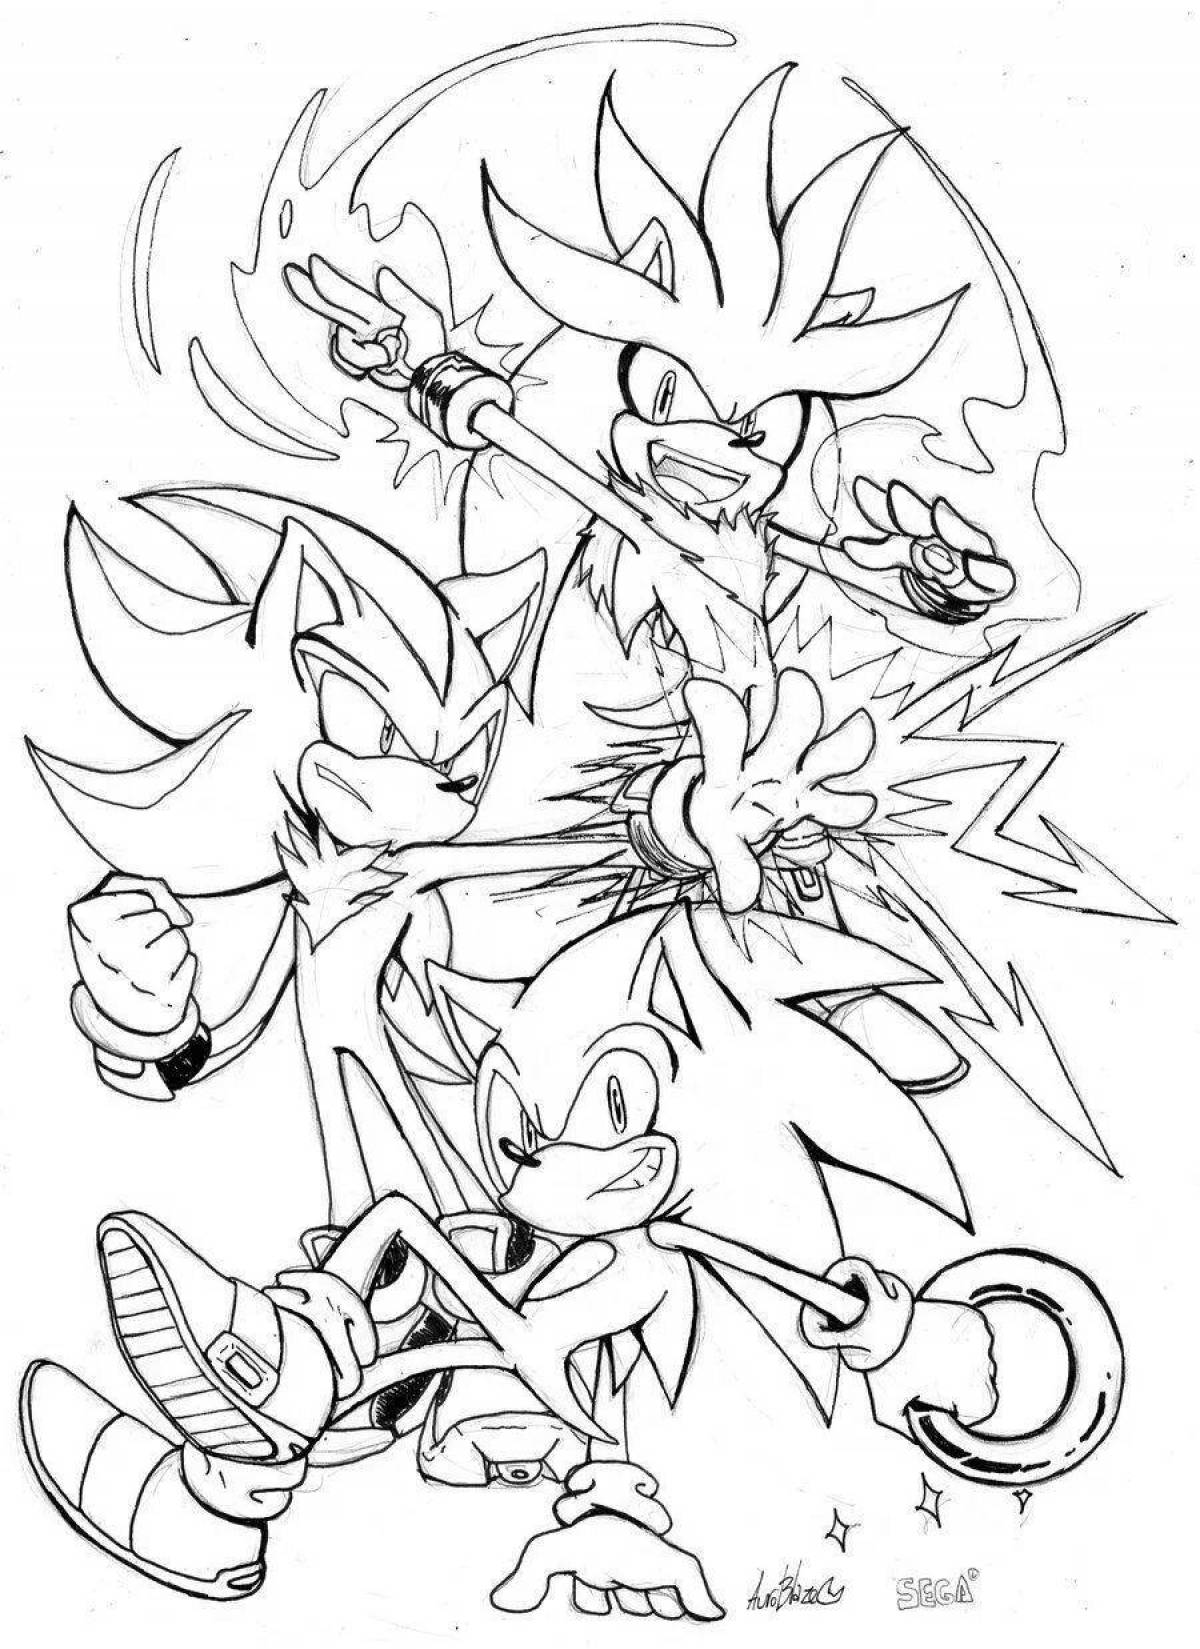 Attractive sonic shredder coloring book